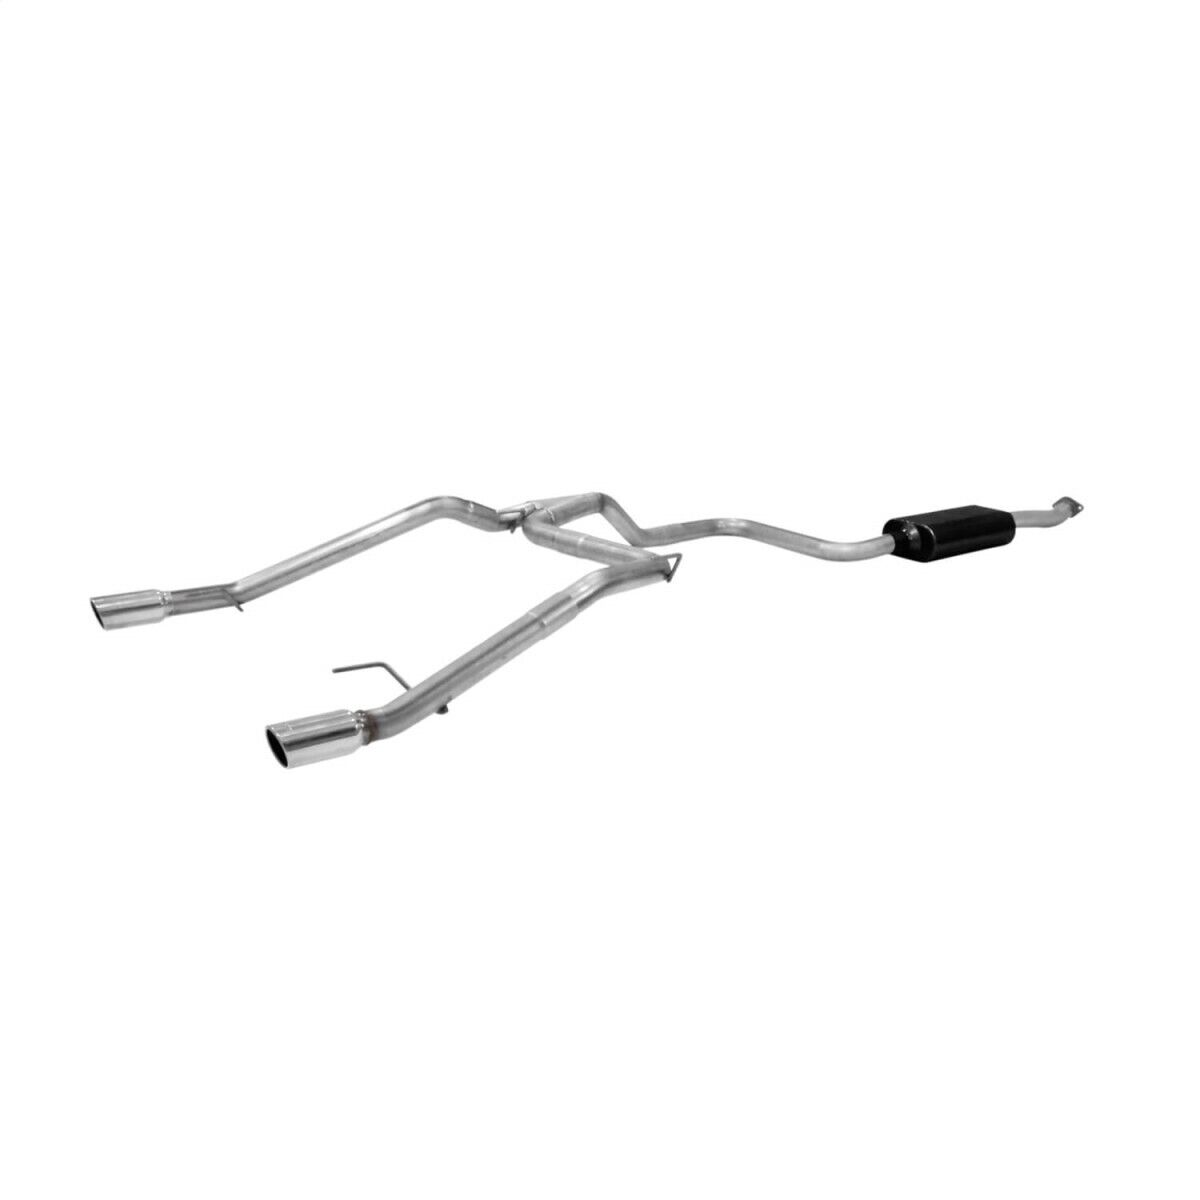 817565 Flowmaster Exhaust System for Chevy Chevrolet Cruze 2011-2015